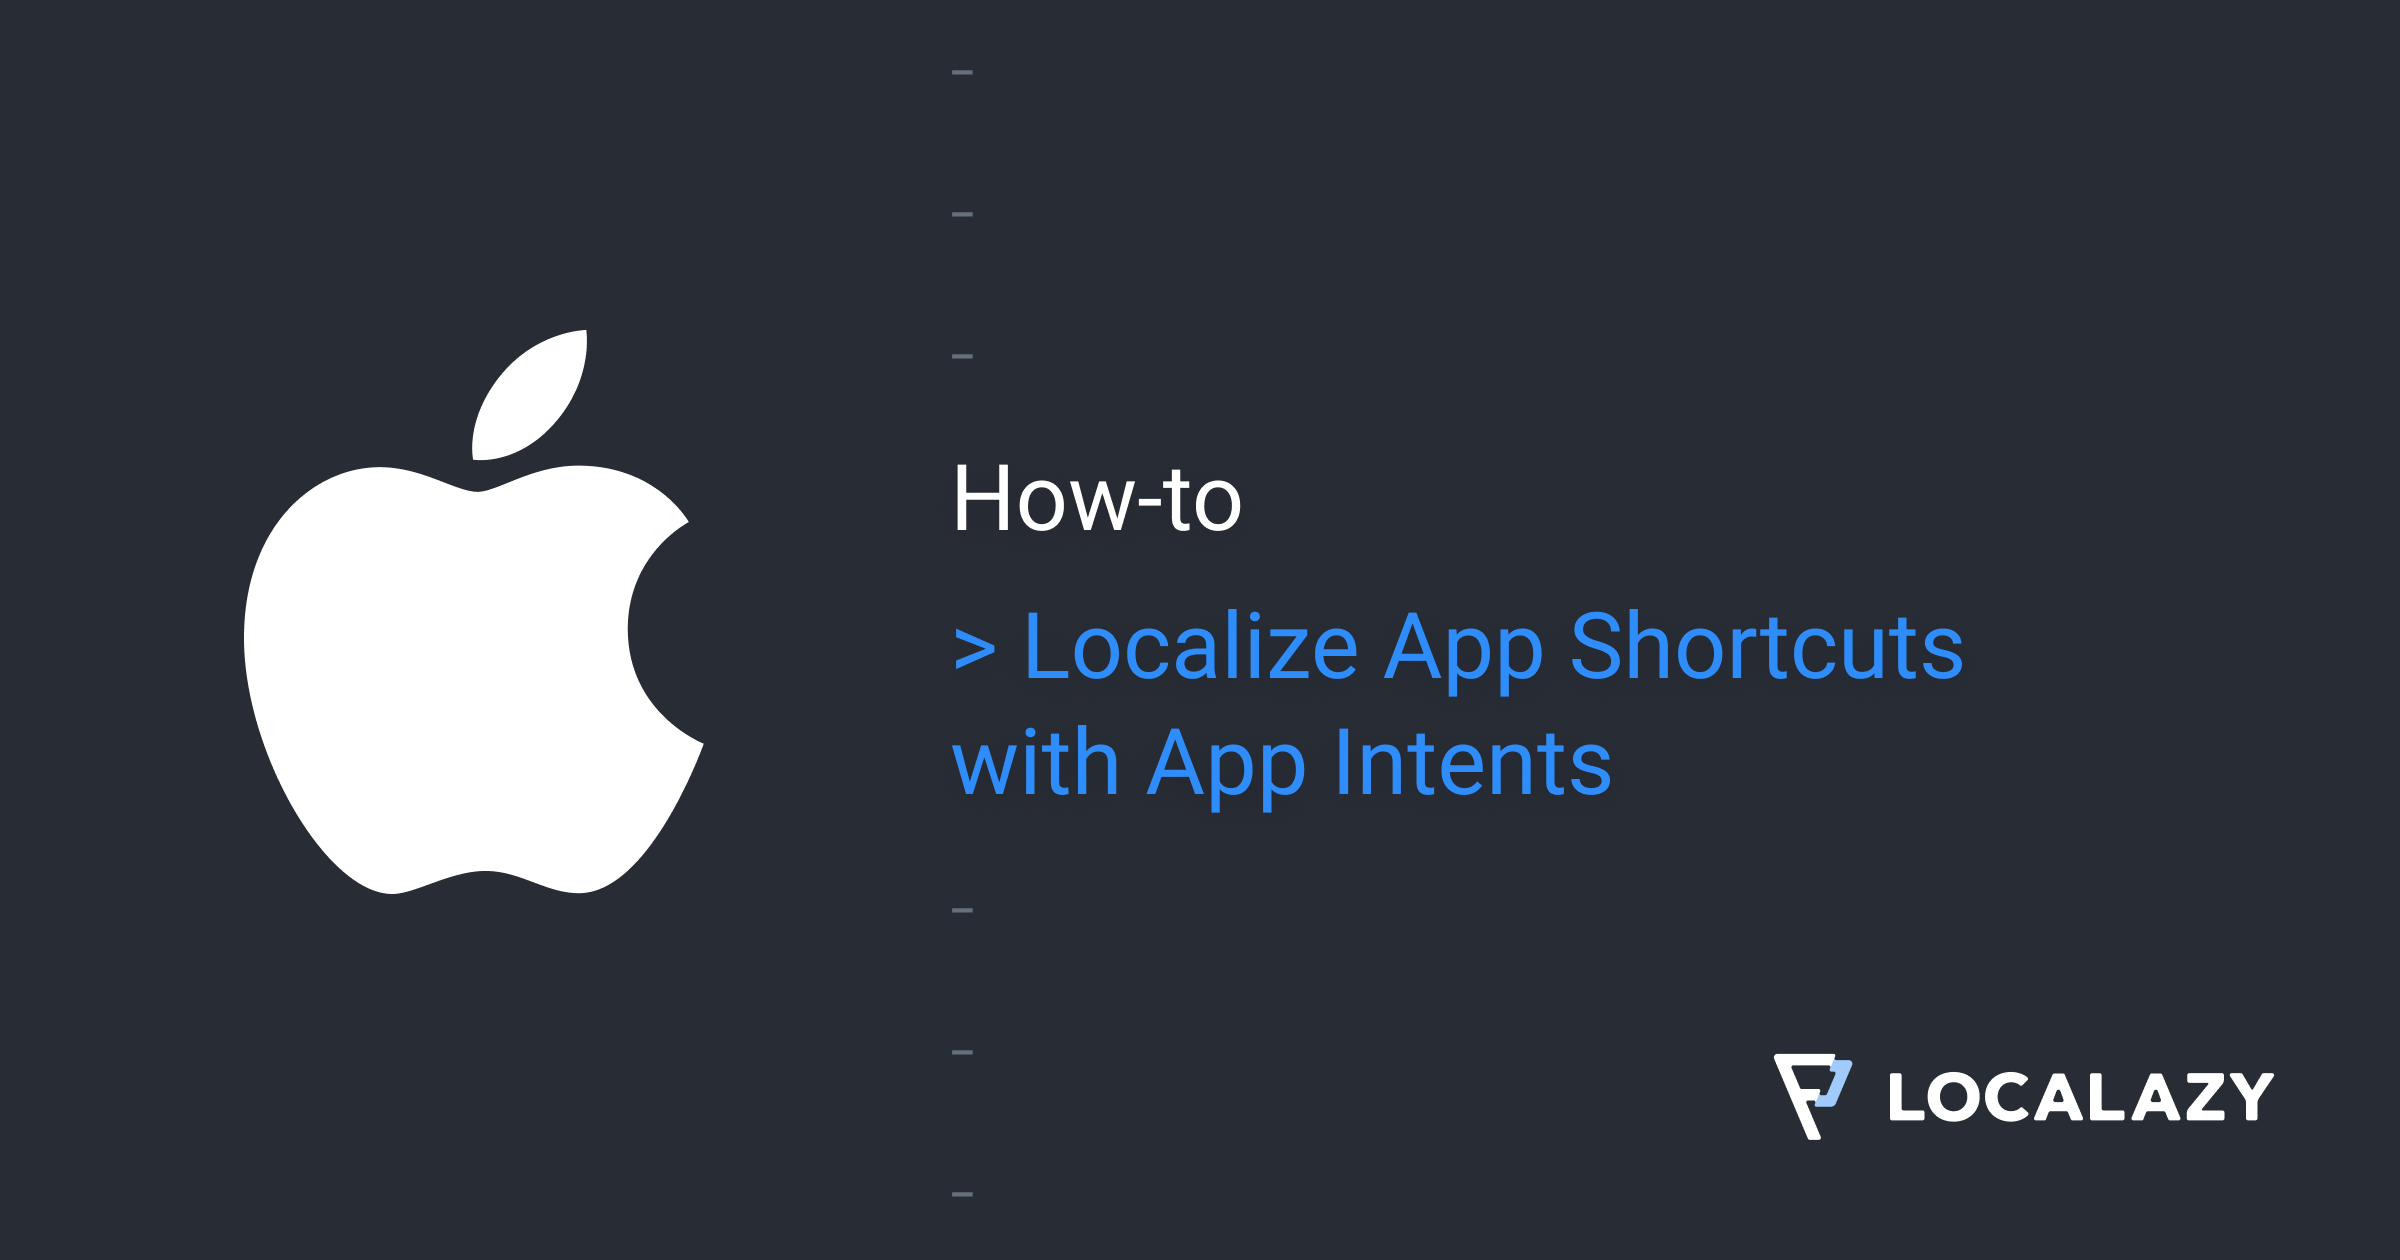 iOS: Localizing App Shortcuts with App Intents